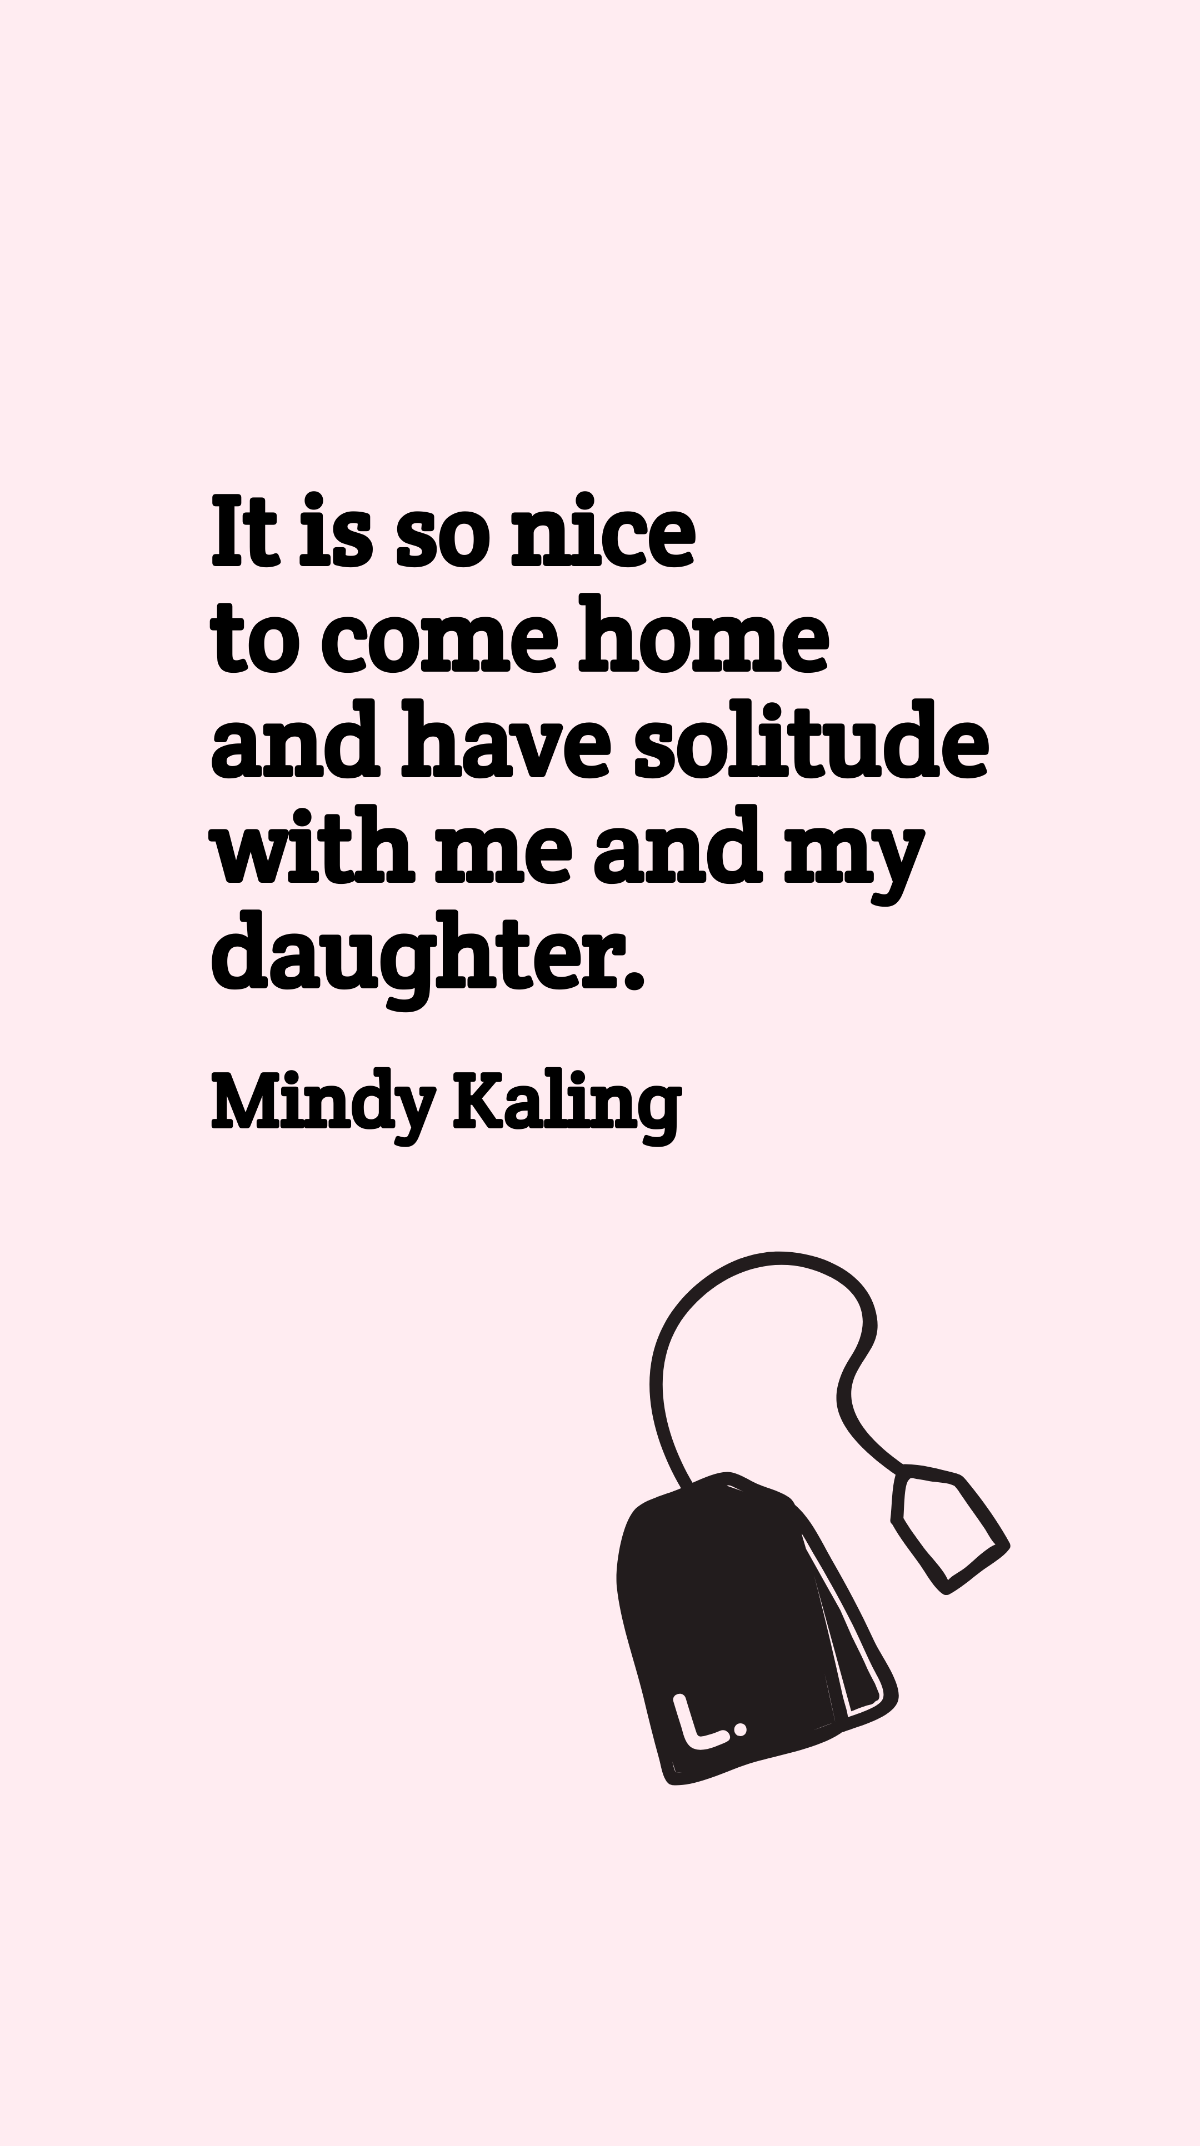 Mindy Kaling - It is so nice to come home and have solitude with me and my daughter. Template